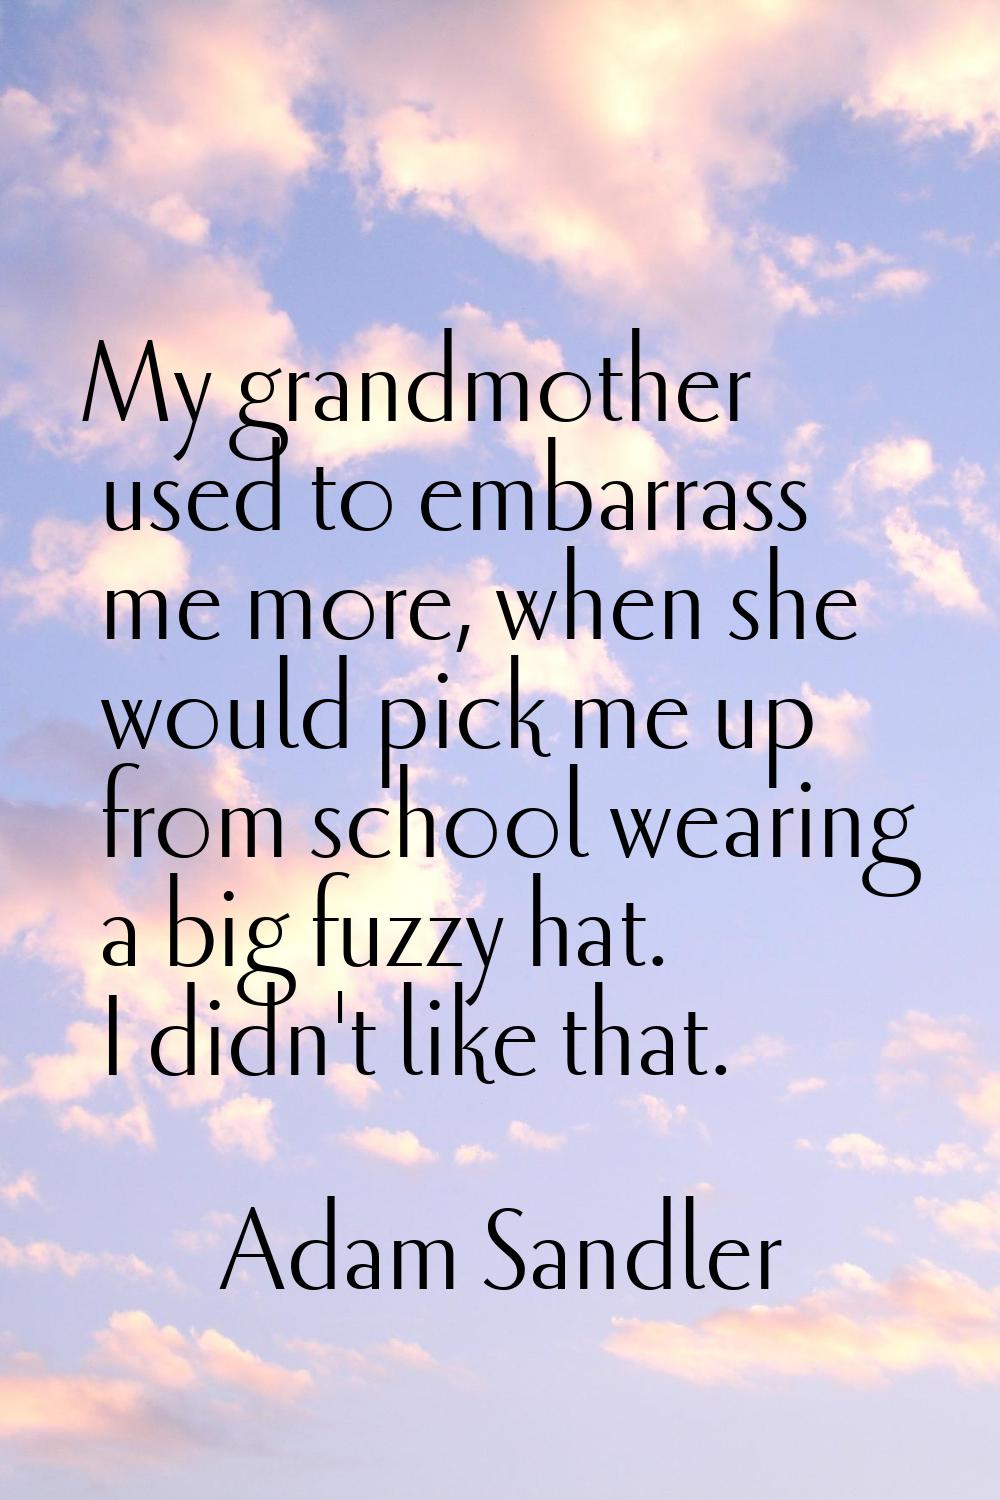 My grandmother used to embarrass me more, when she would pick me up from school wearing a big fuzzy